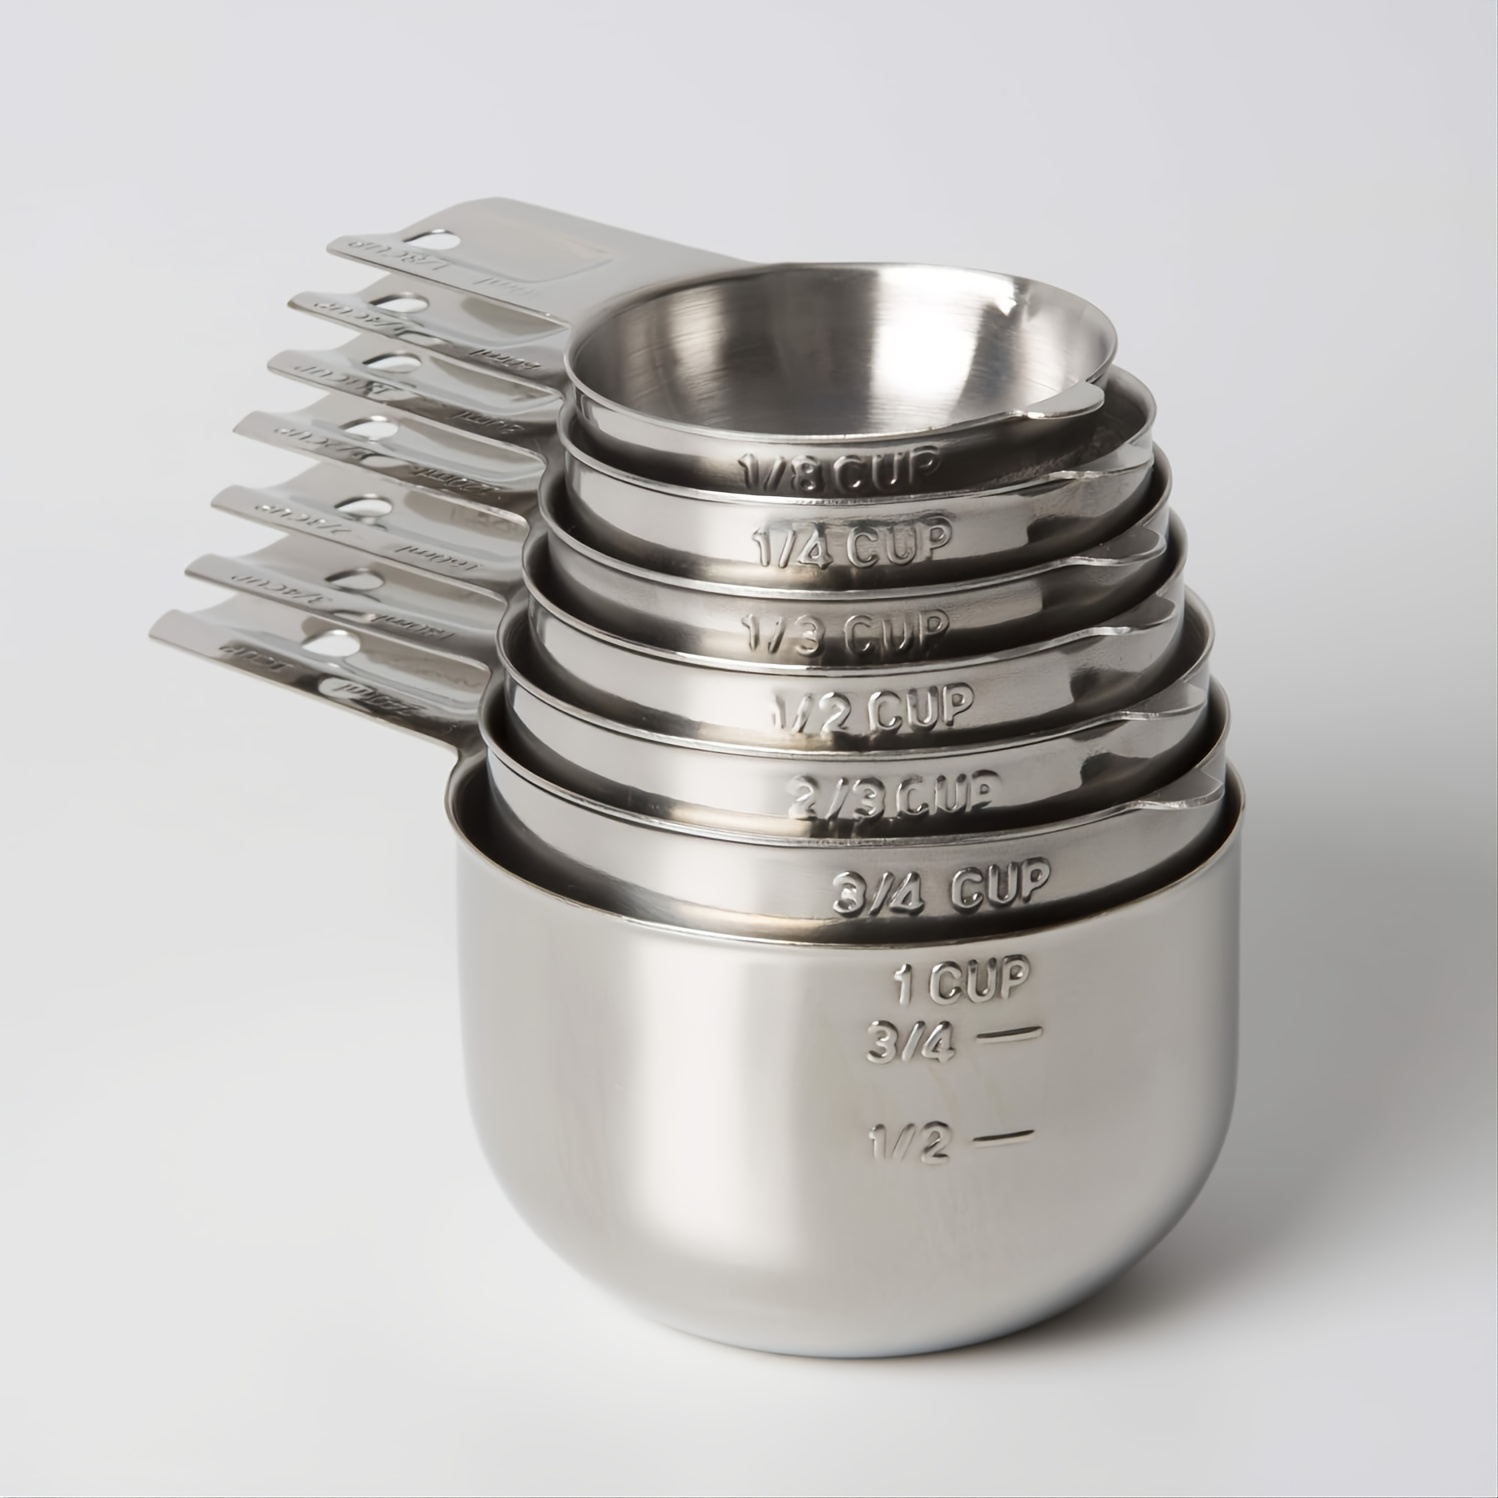 Stainless Steel Measuring Cups Set of 7 Stackable Heavy Duty Measuring Cups  for Dry and Liquid Ingredients